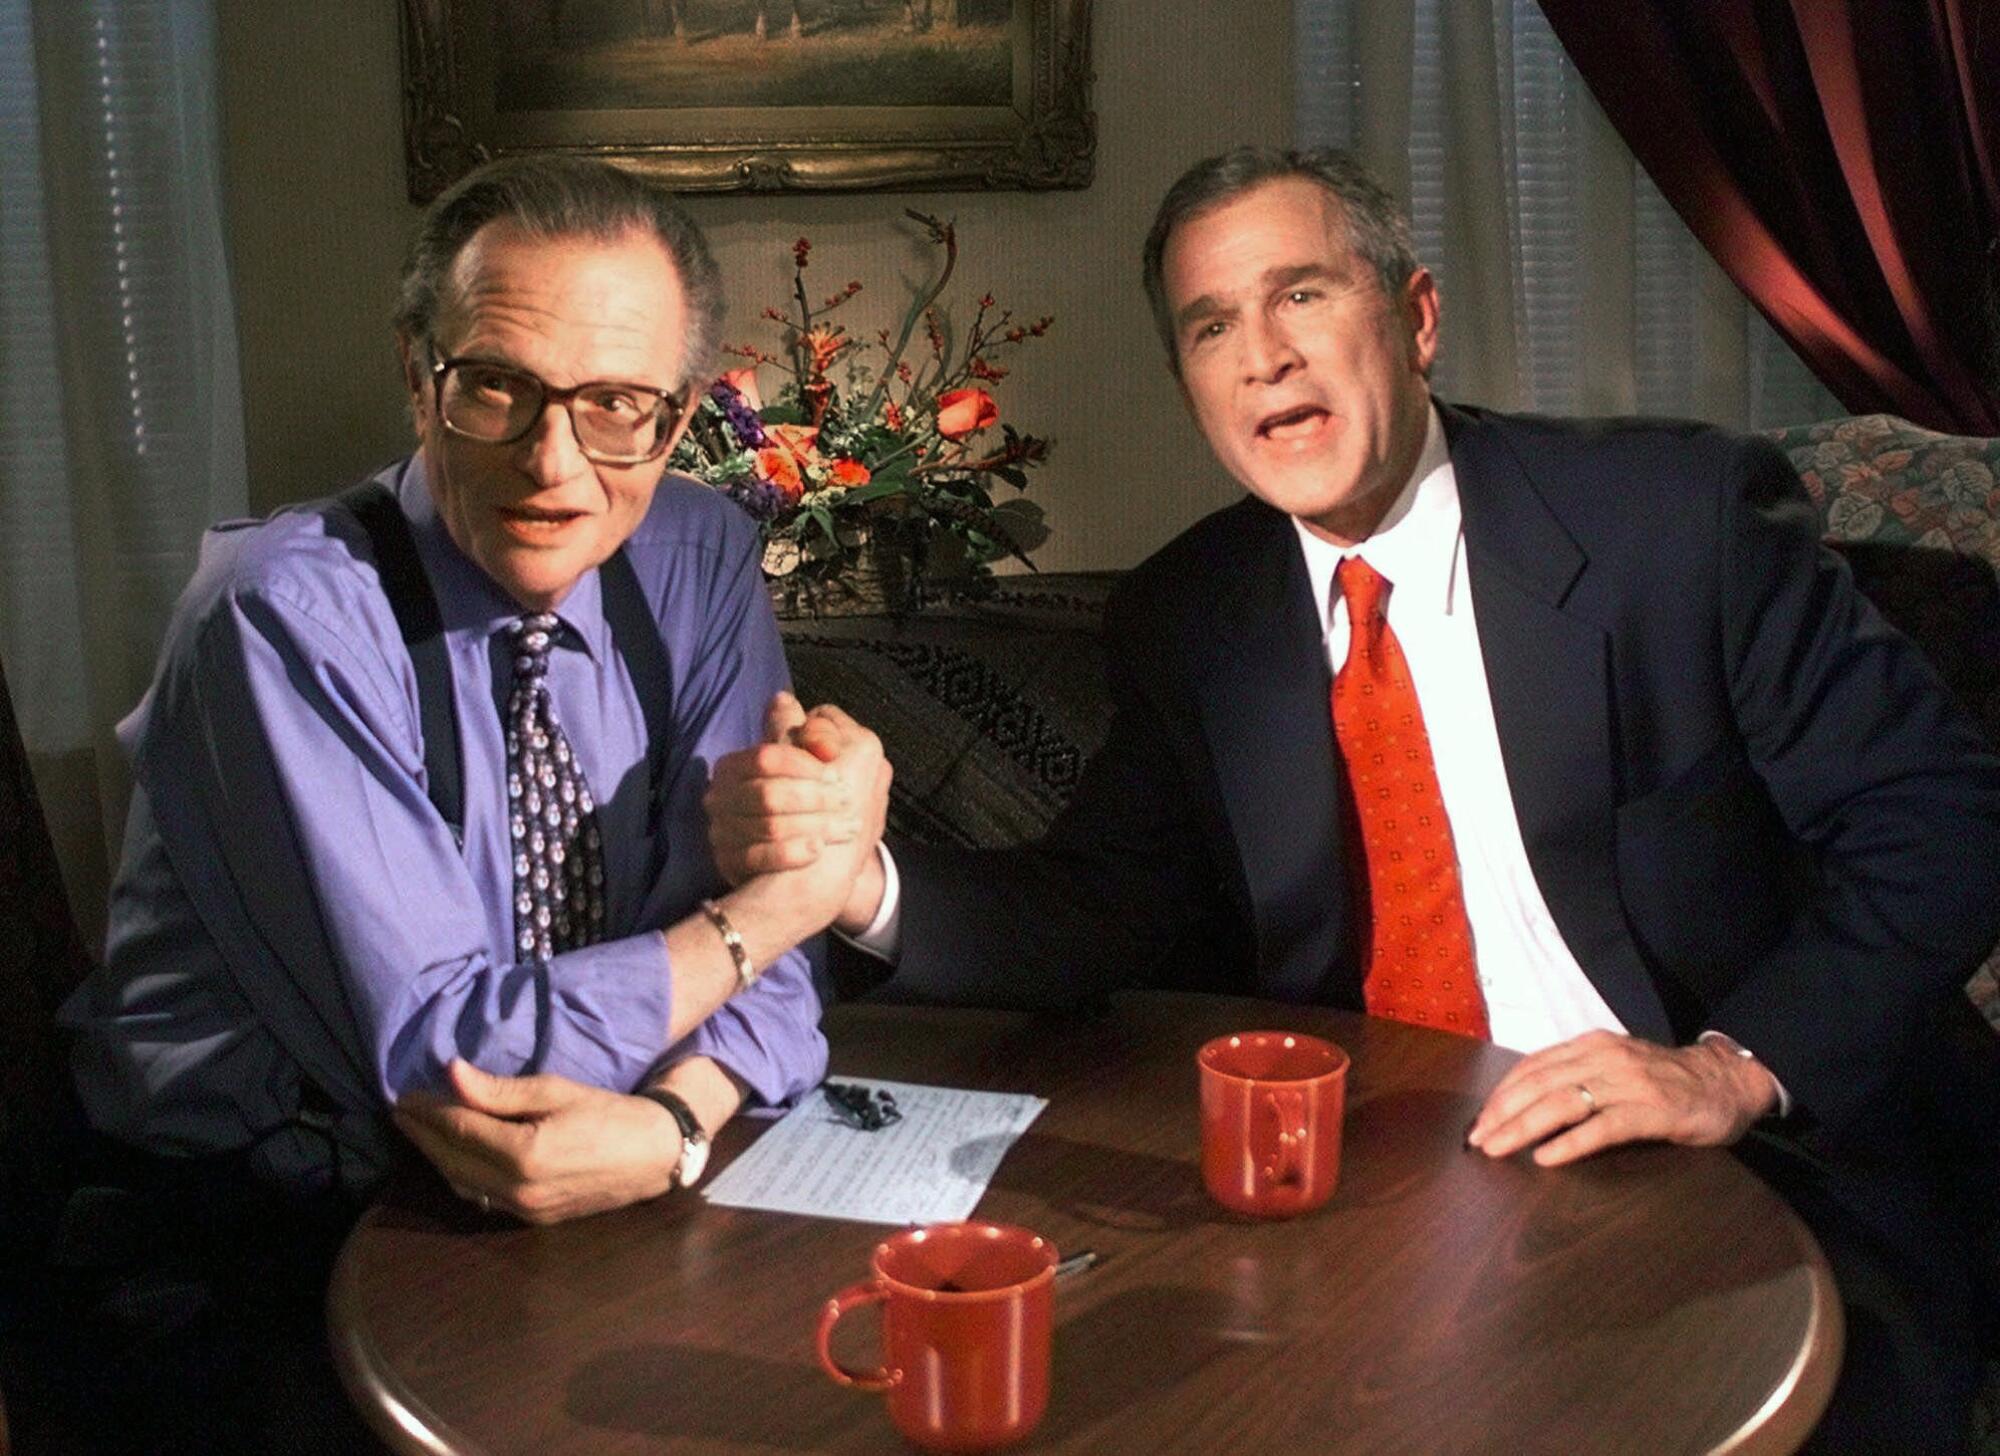 Republican presidential candidate Texas Gov. George W. Bush jokes with CNN's Larry King in 1999